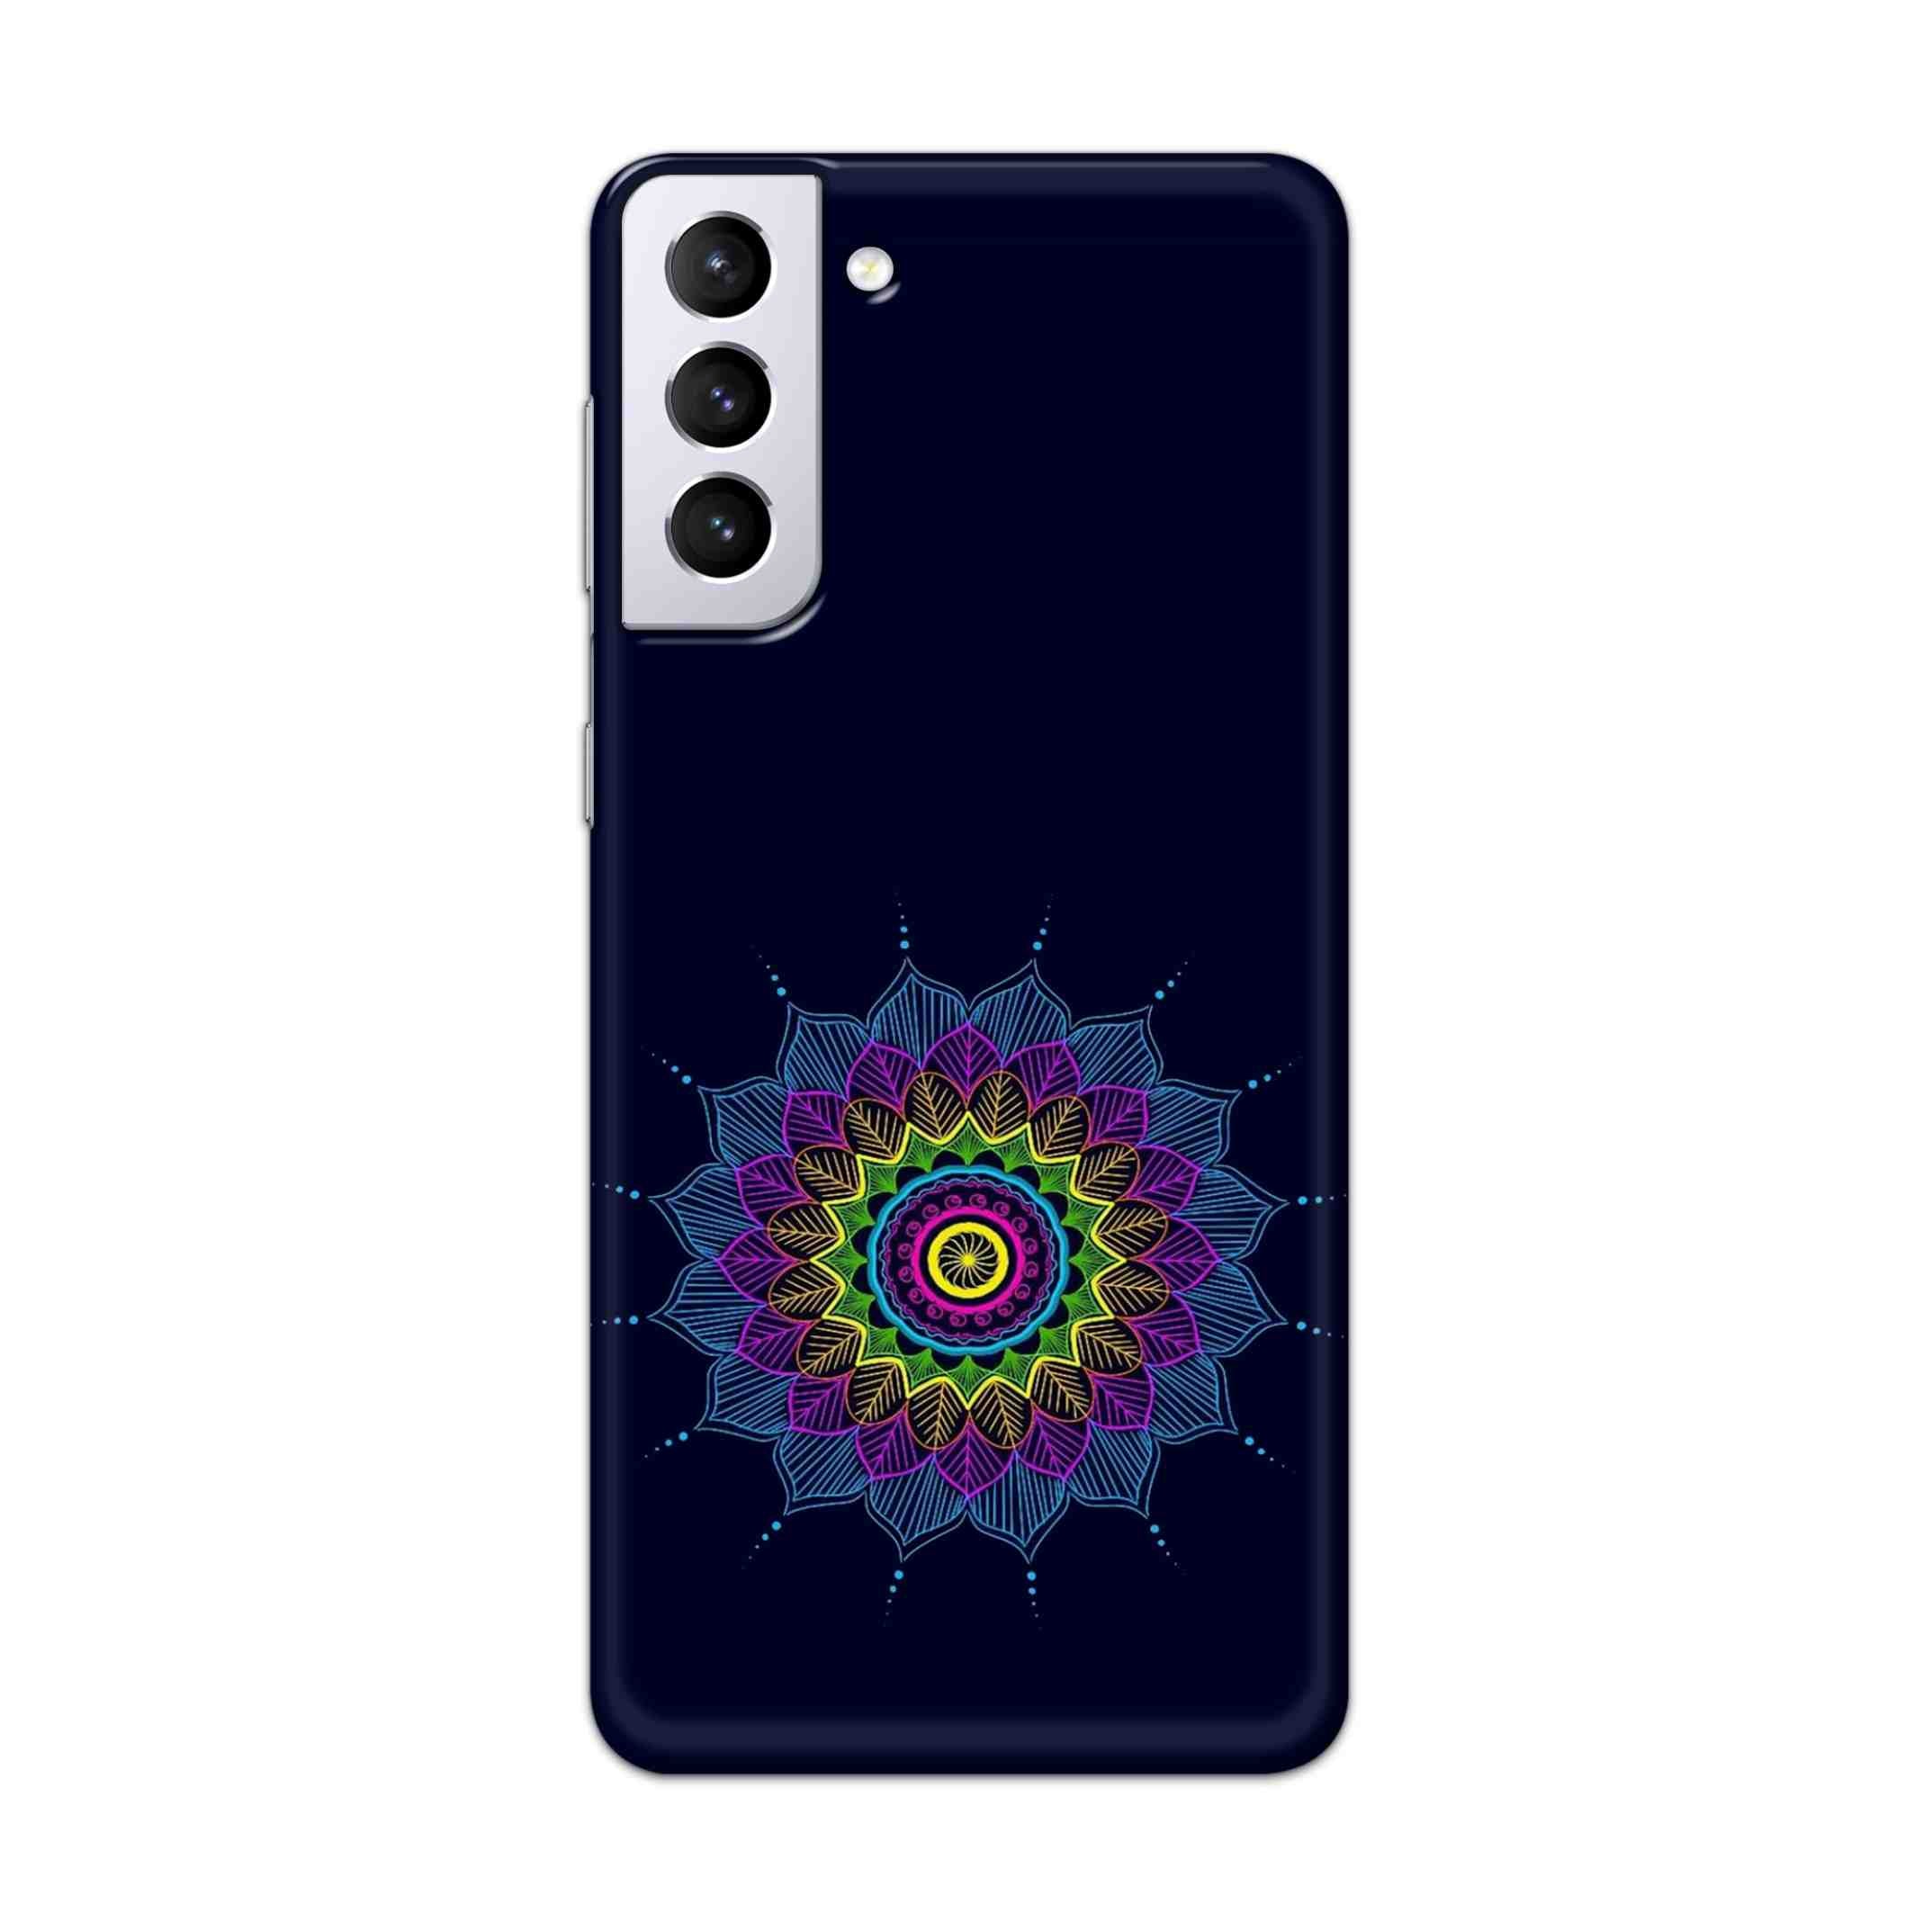 Buy Jung And Mandalas Hard Back Mobile Phone Case Cover For Samsung Galaxy S21 Plus Online